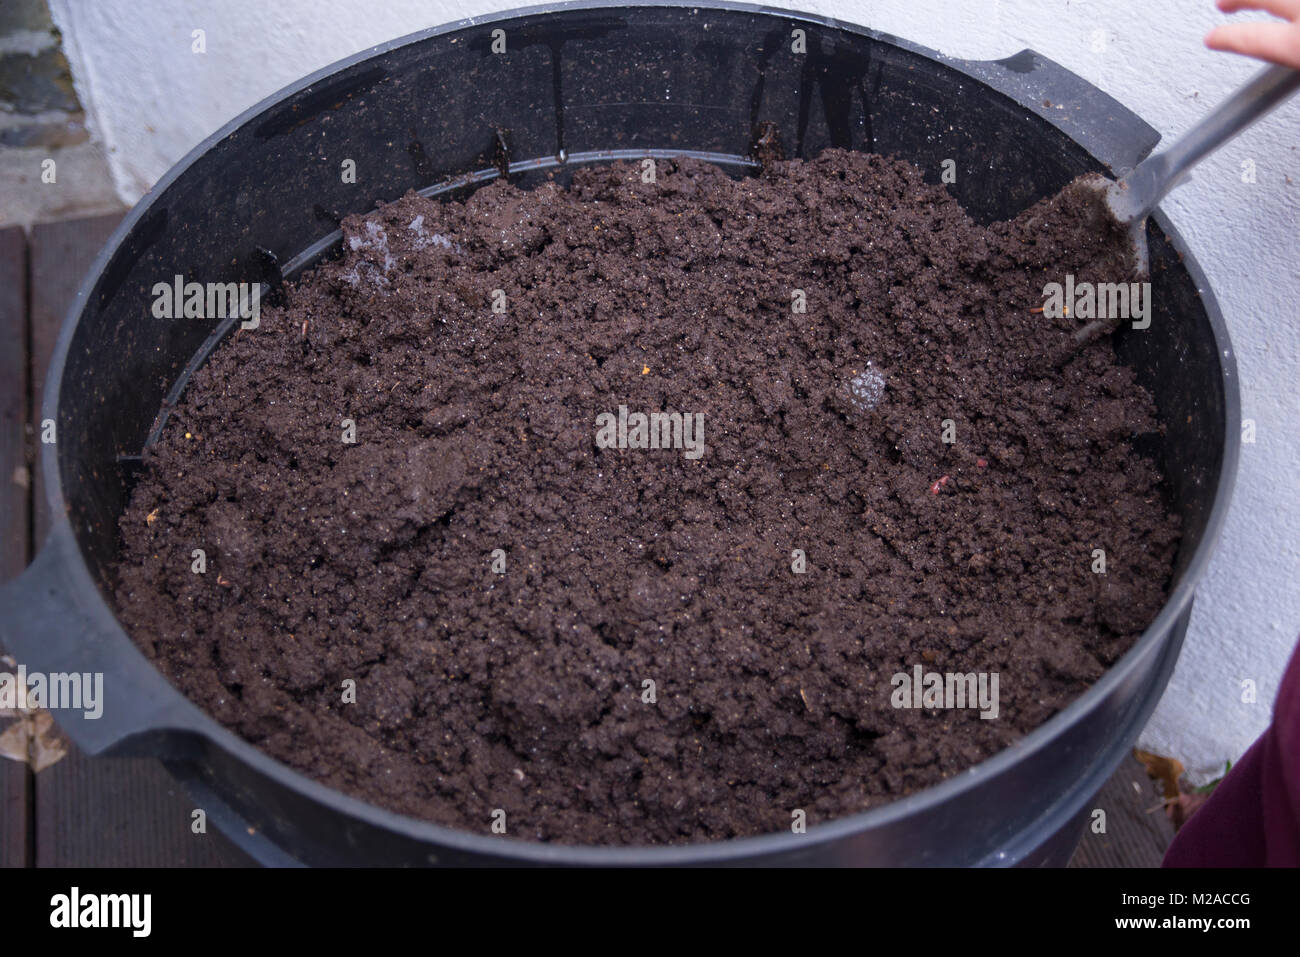 Bottom tray of a worm composter showing nutrient rich soil produced by worms Stock Photo